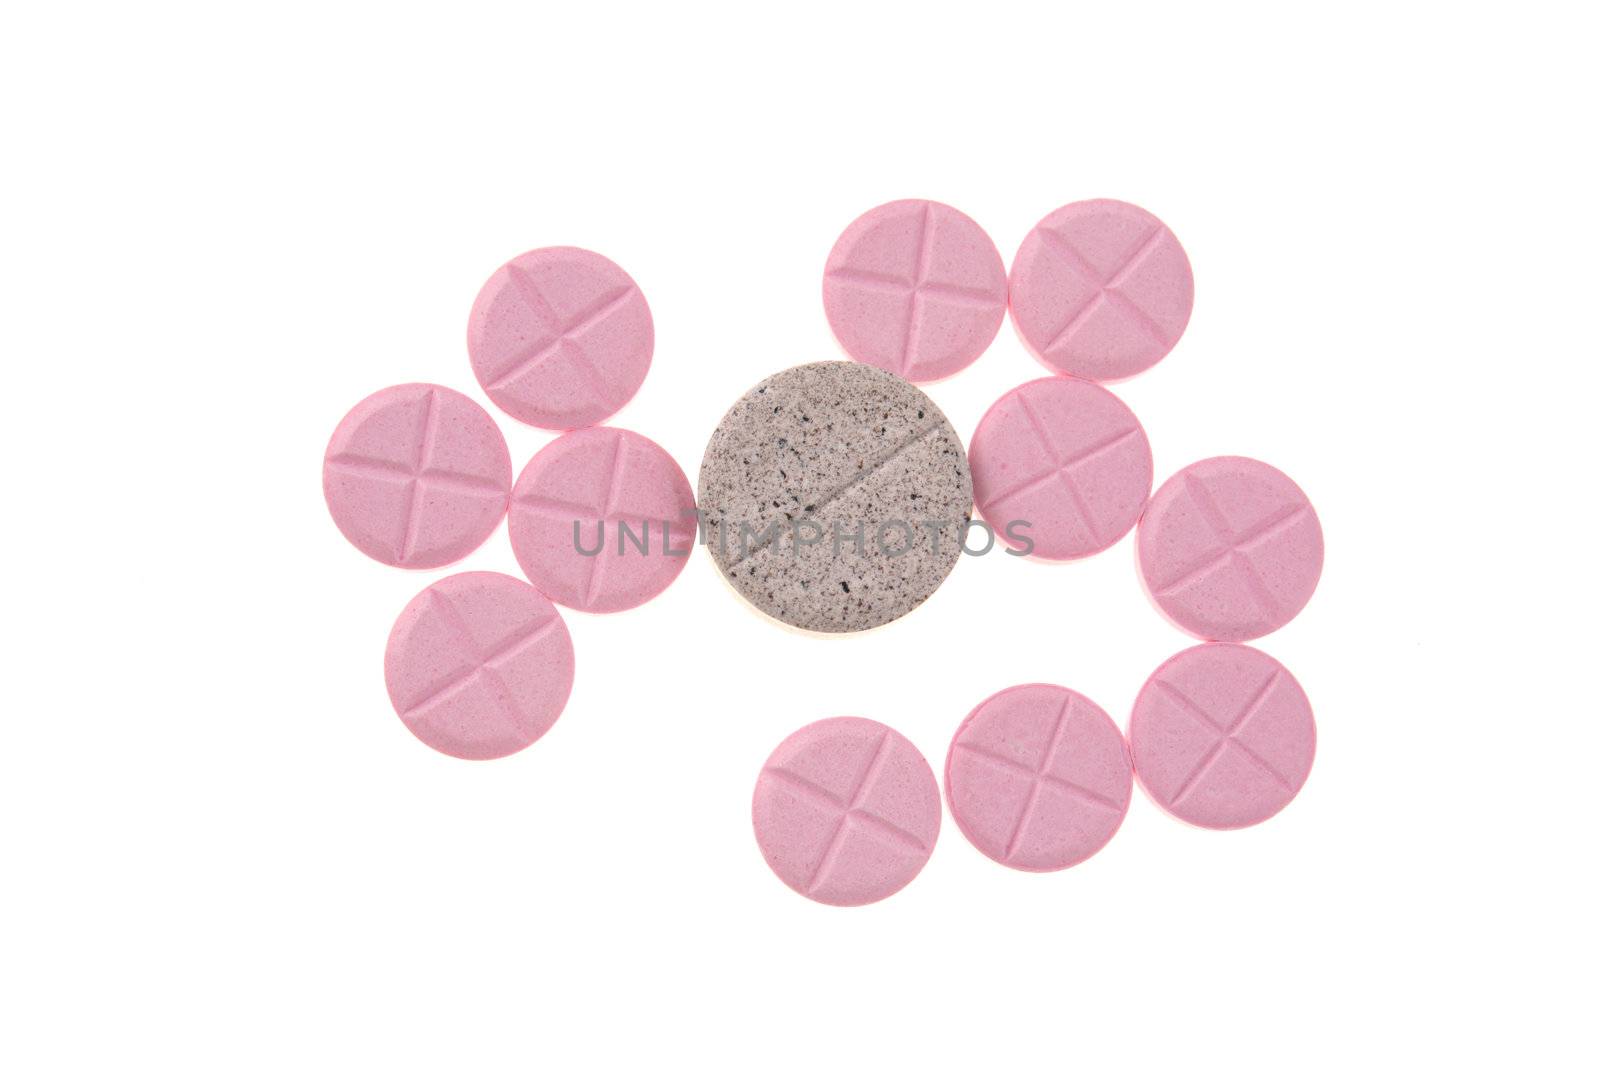 Close-up on pills against white background 